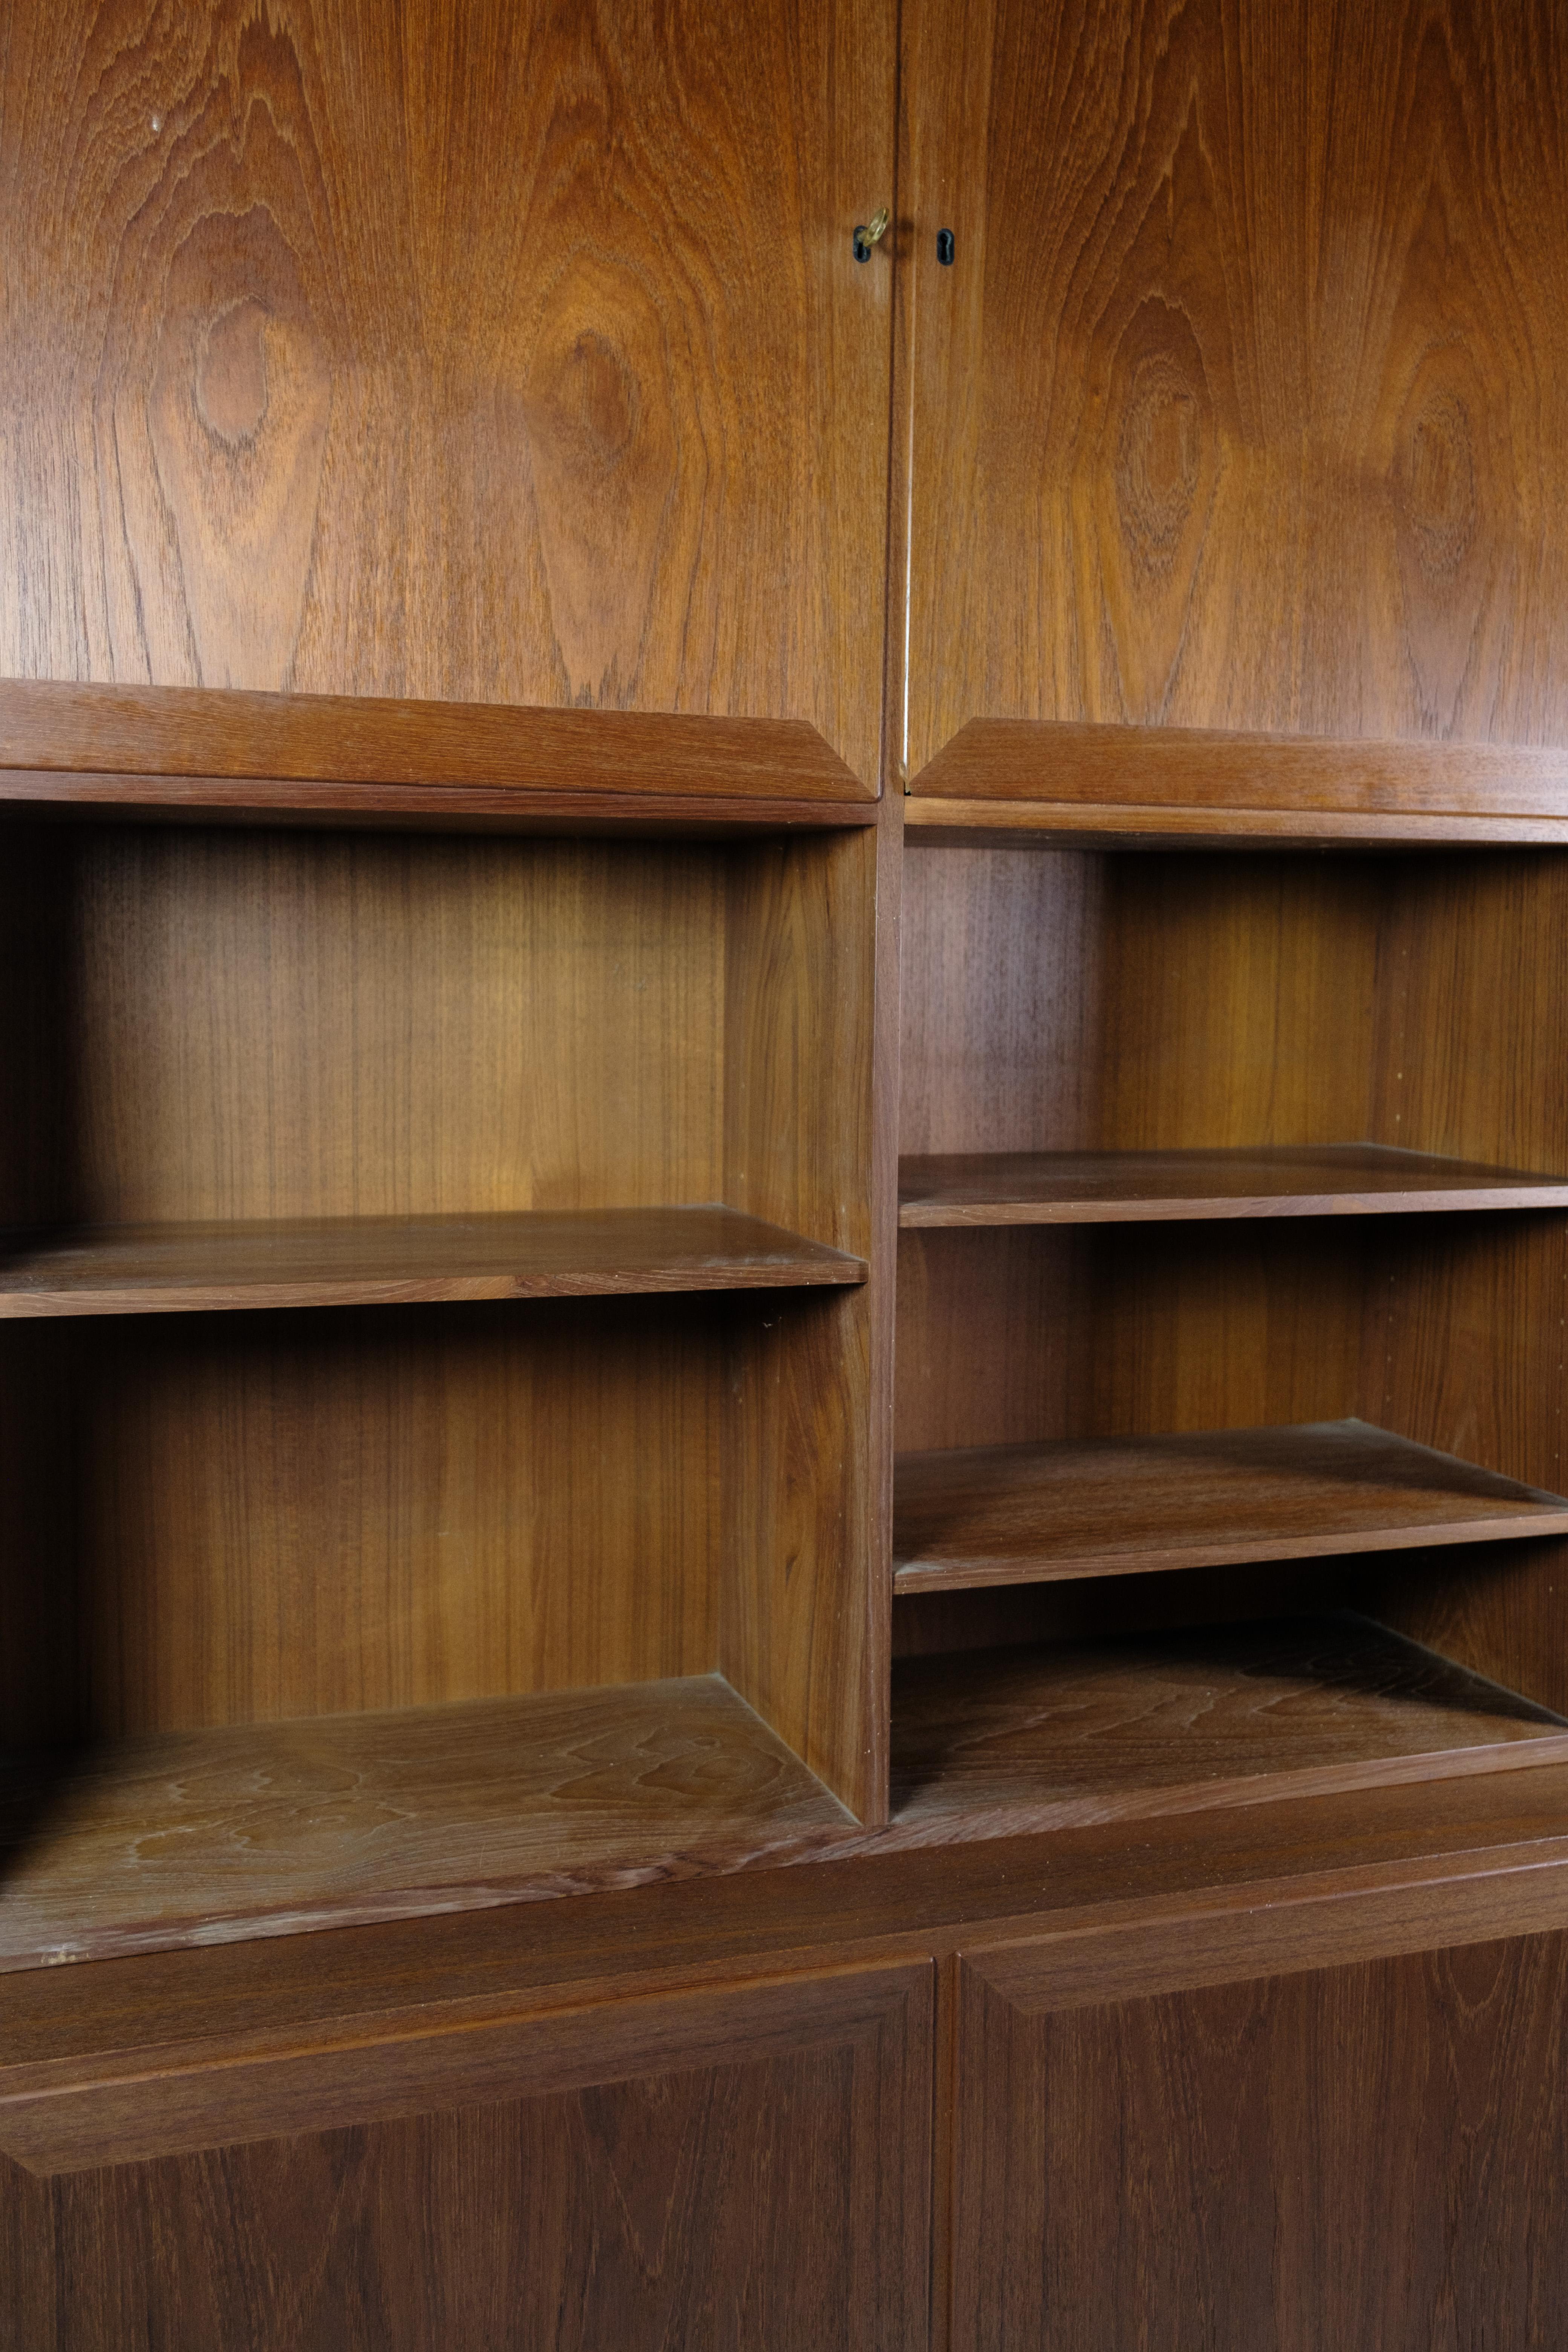 Mid-Century Modern Bookcase Made In Teak, Danish design From 1960s For Sale